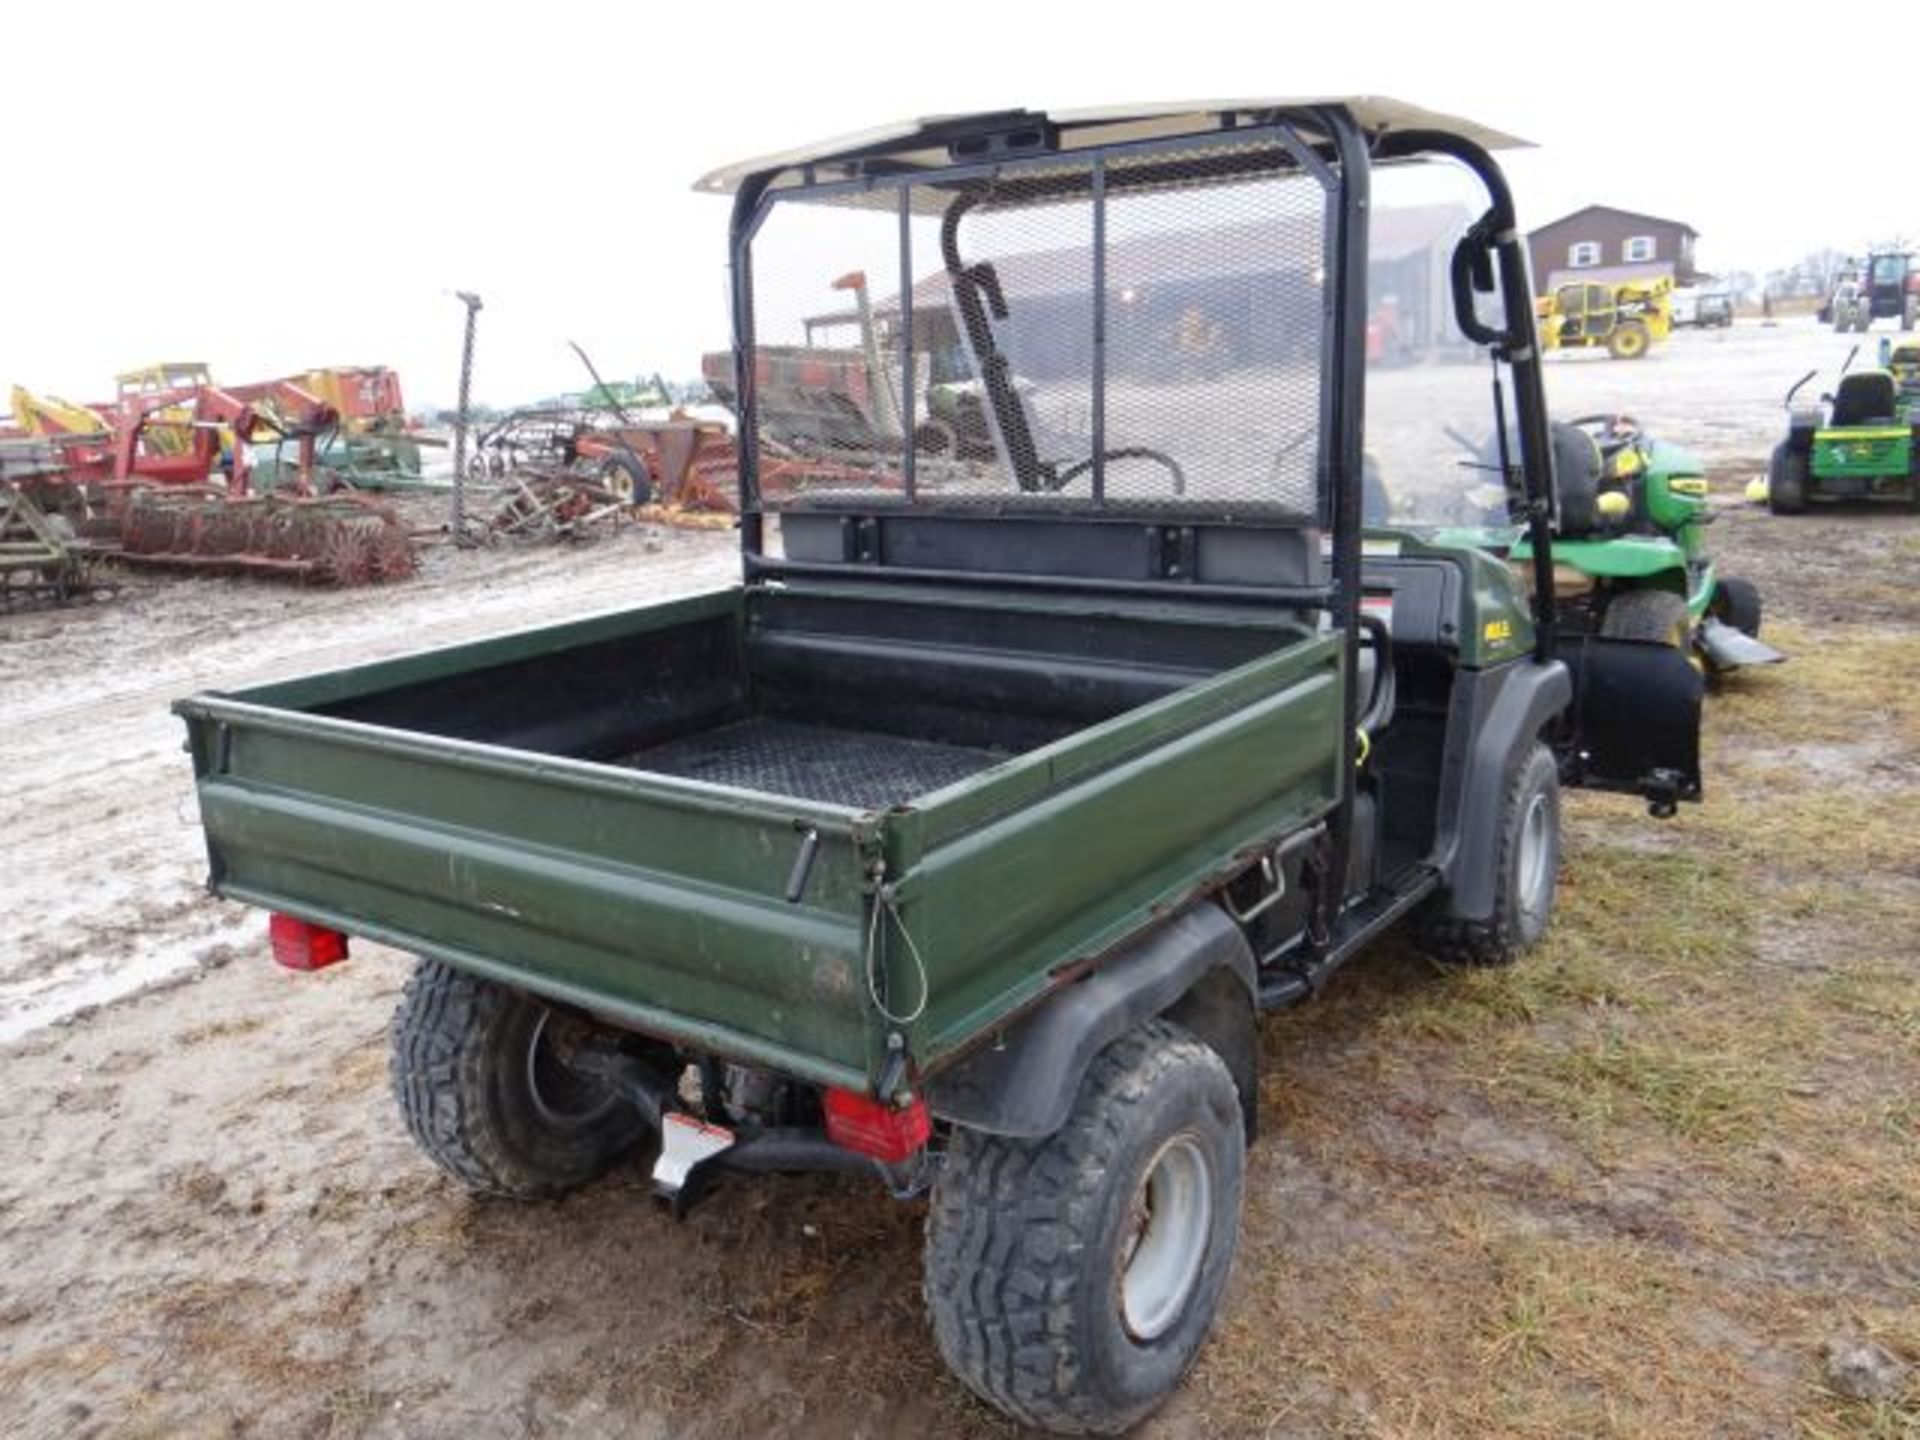 Kawasaki 3010 Mule, 2007 #112654, 960 hrs, Snow Blade, Power Lift, 4wd, Poly Windshield and Roof - Bild 3 aus 3